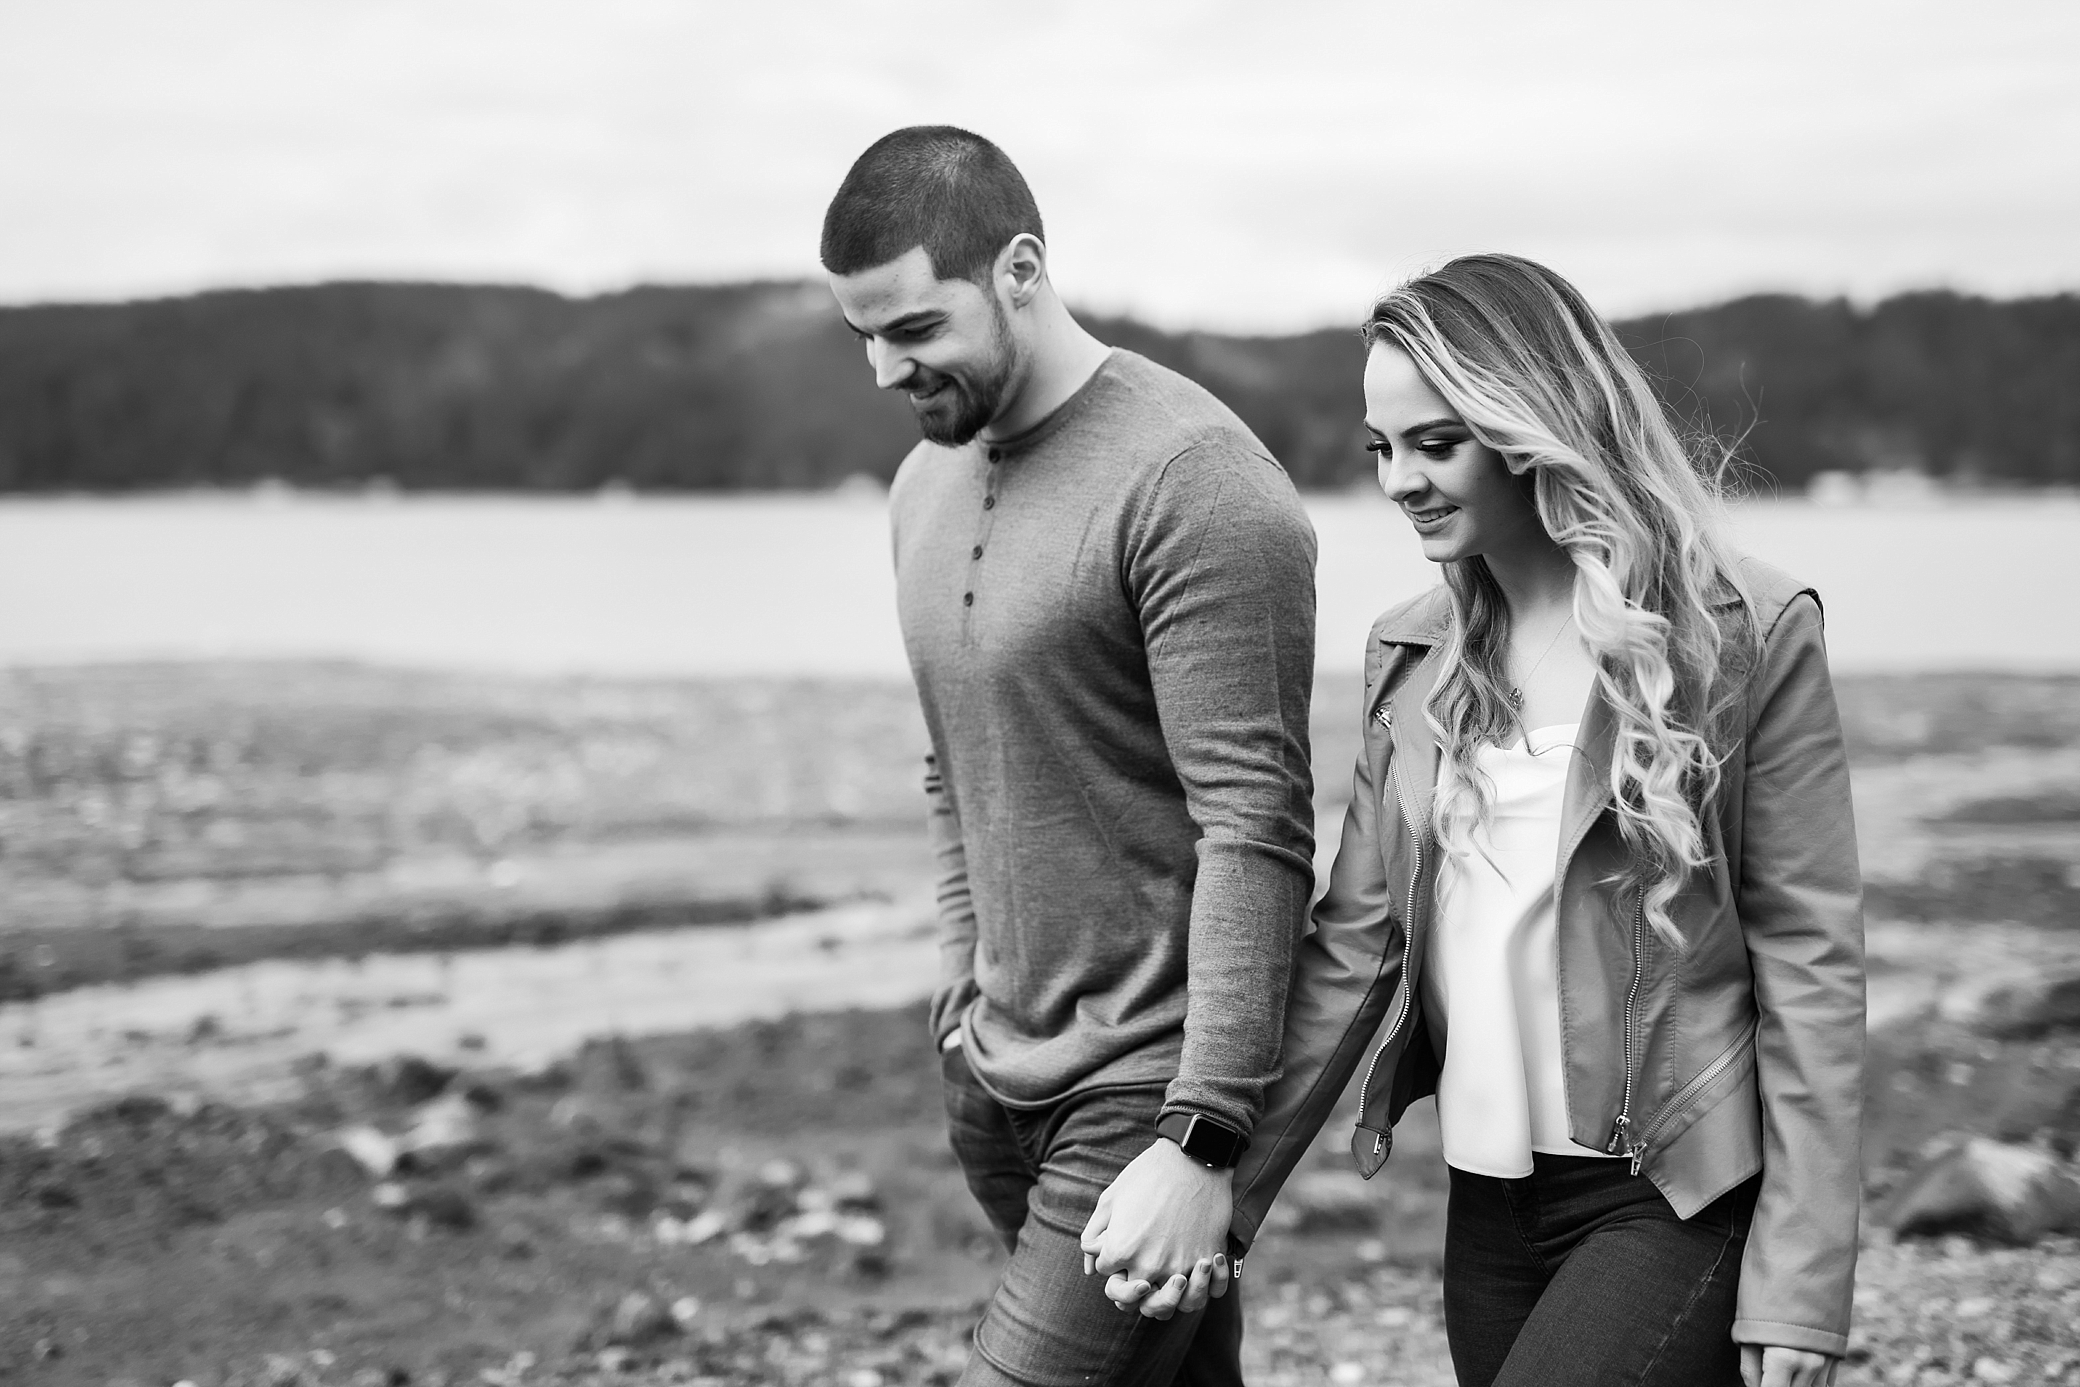 How to create movement during an engagement photoshoot | Megan Montalvo Photography